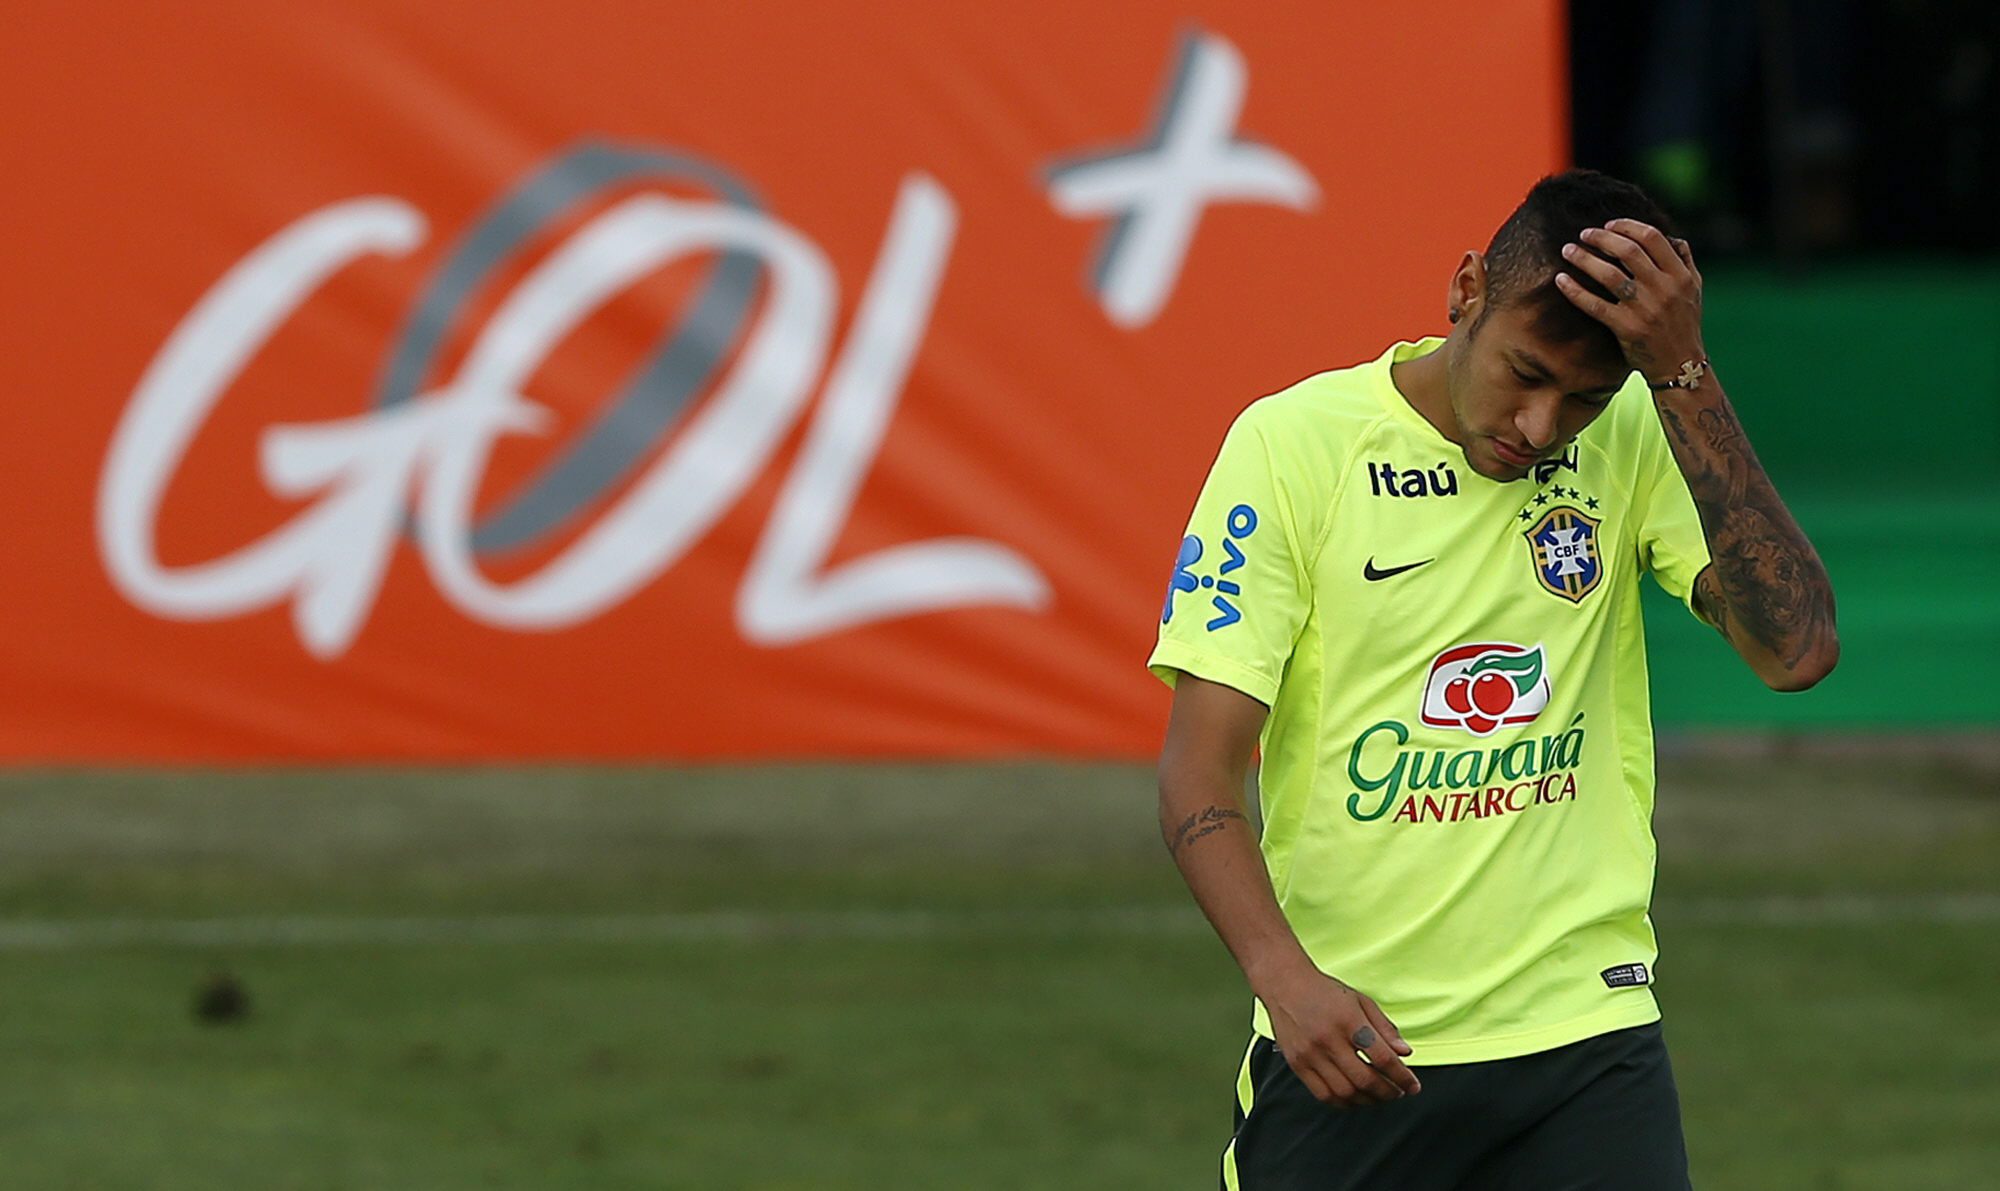 Neymar hangs his head at a training session ahead of the announcement of his ban. Photo: EPA